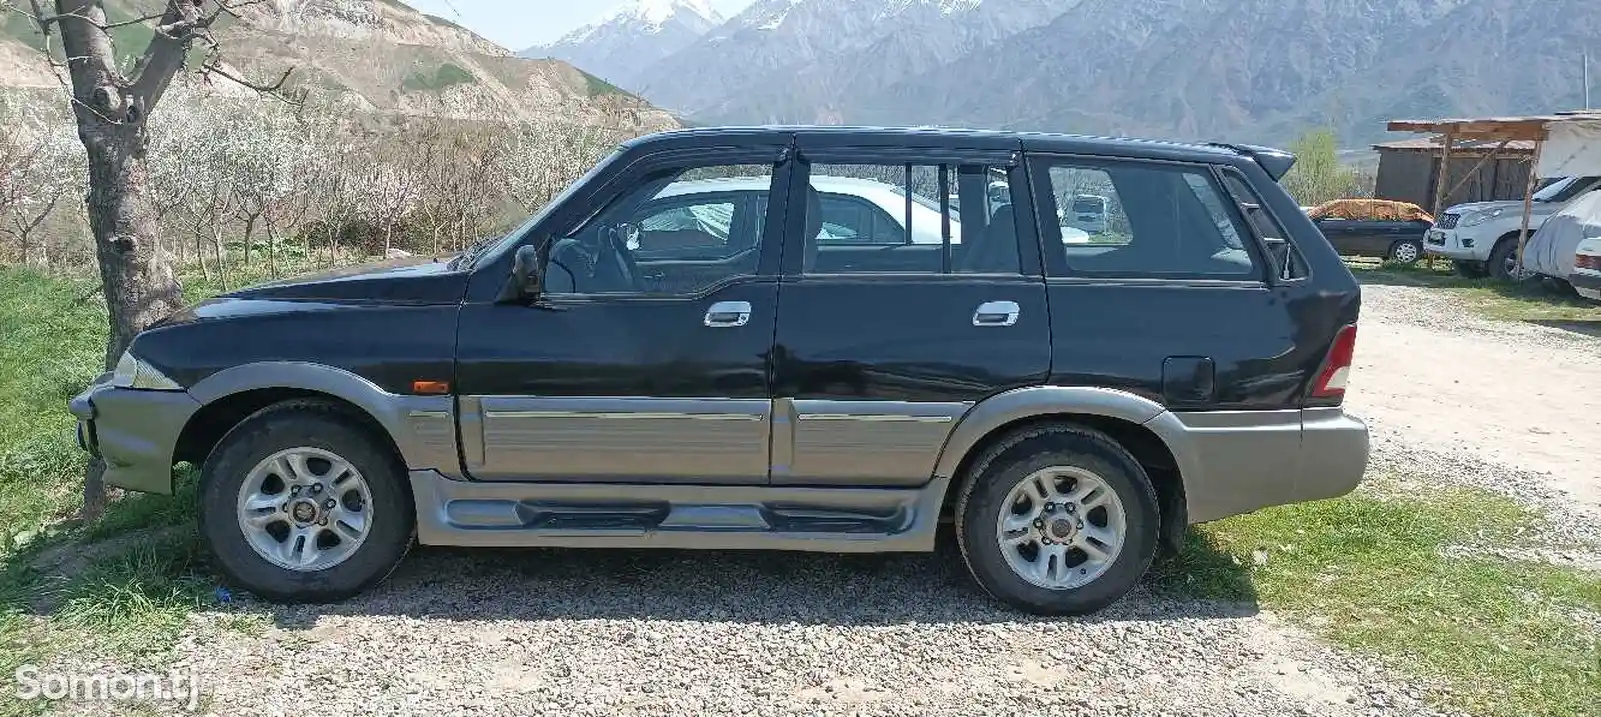 Ssang Yong Musso, 2002-1